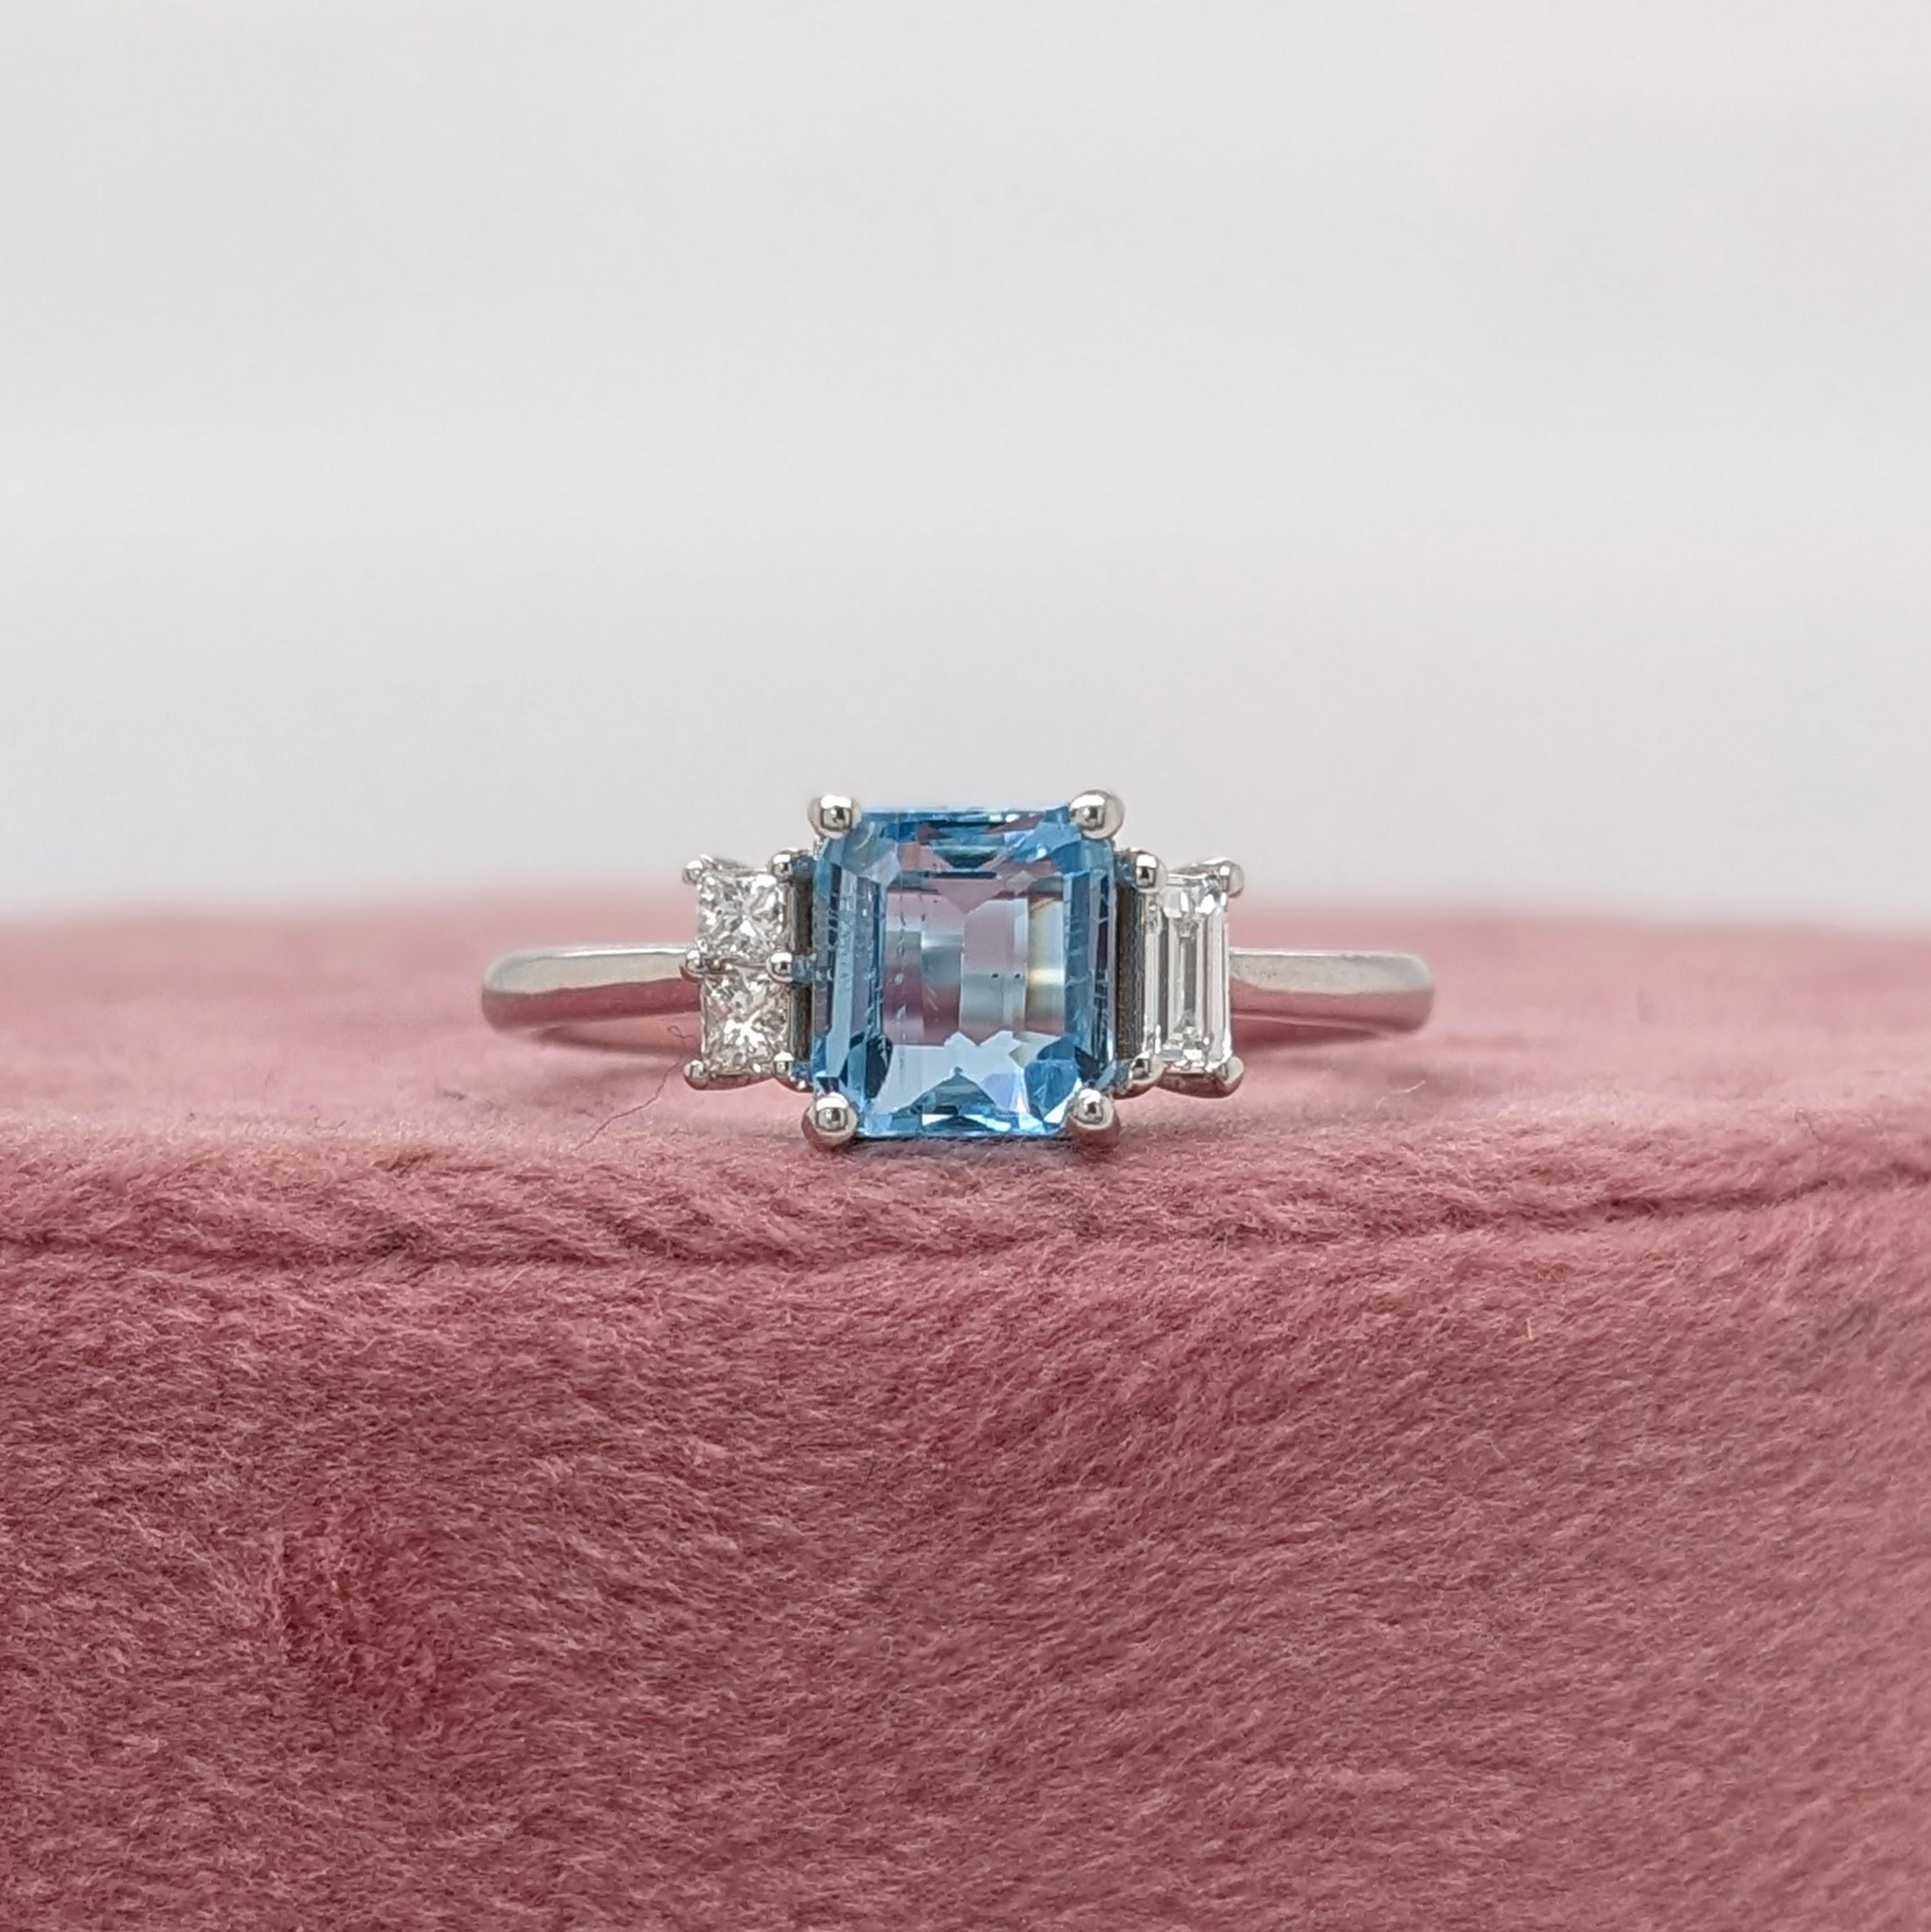 This beautiful ring features a 1.08 carat emerald cut aquamarine gemstone with natural earth mined baguette diamond accents, all set in solid 14K gold. This ring makes a lovely March birthstone gift for your loved ones! 

Specifications

Item Type: